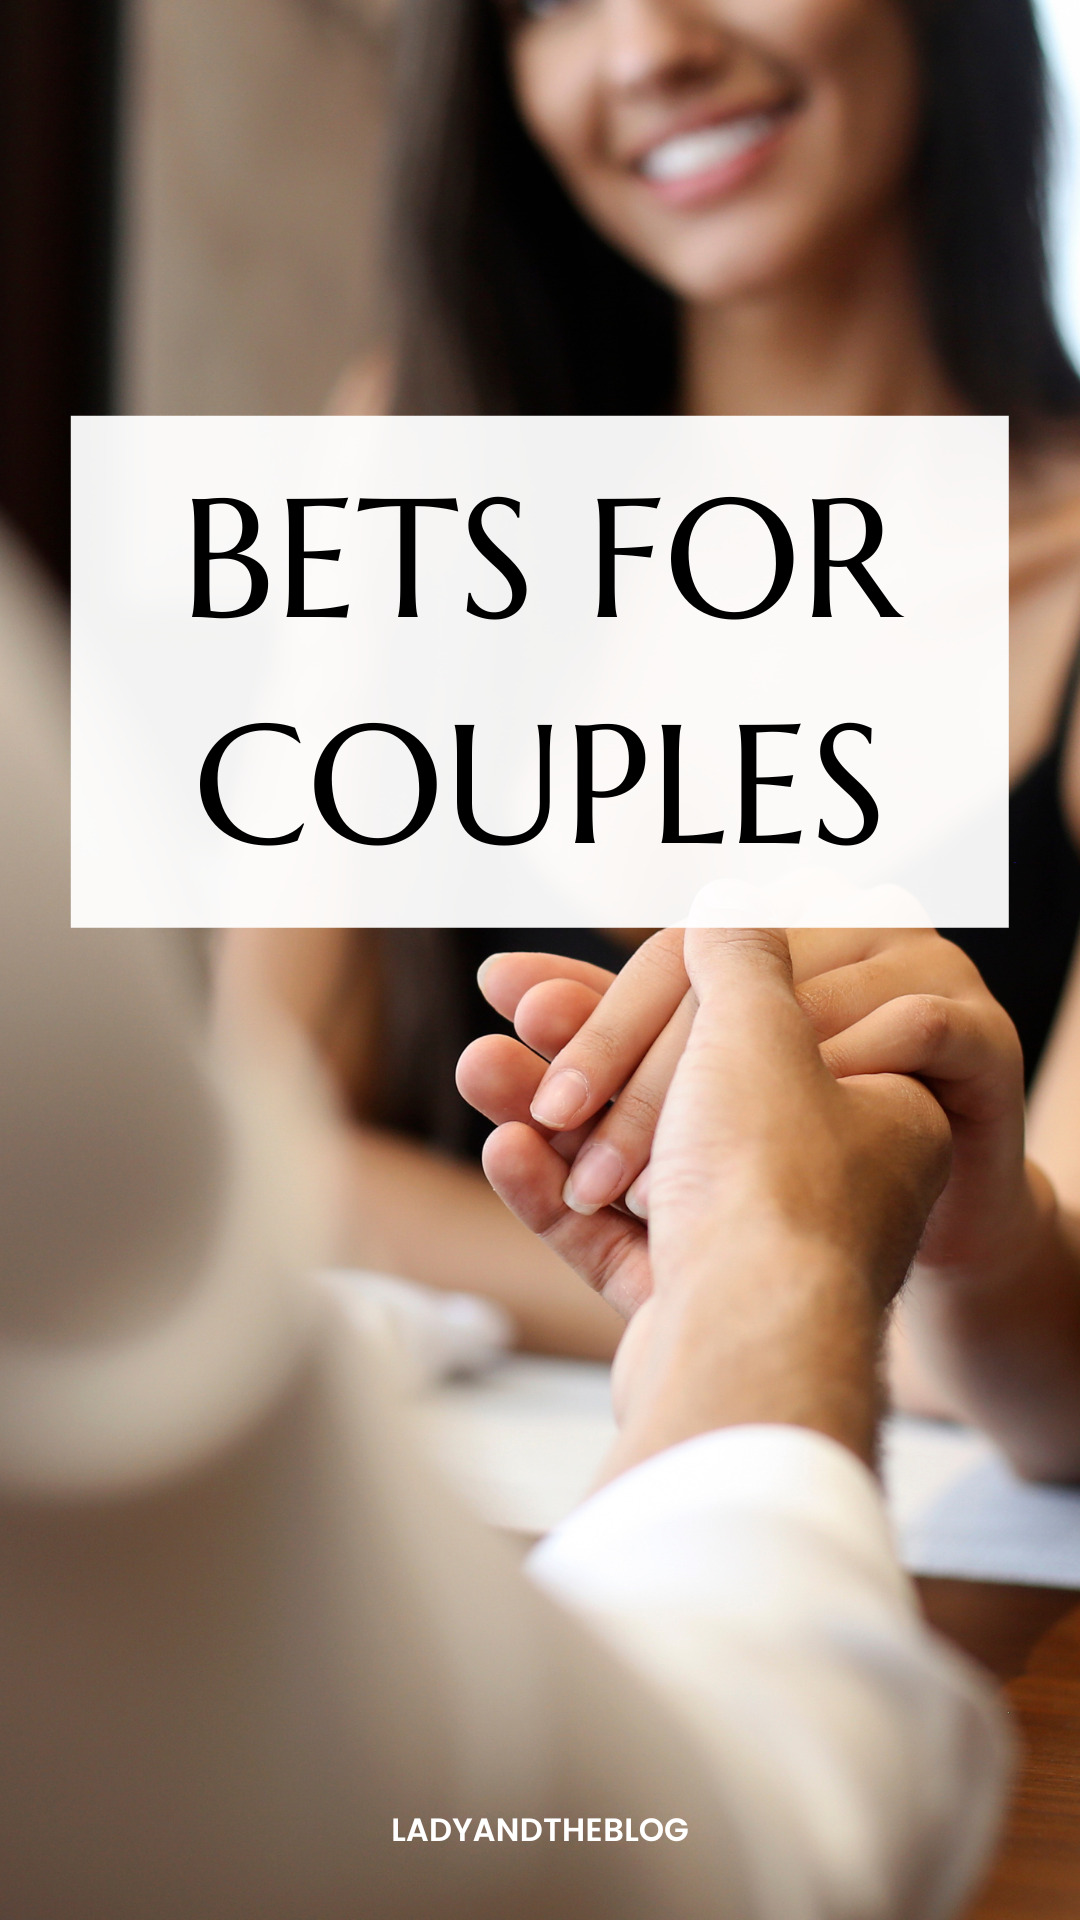 angus galbraith recommends good bets to make with your girlfriend pic